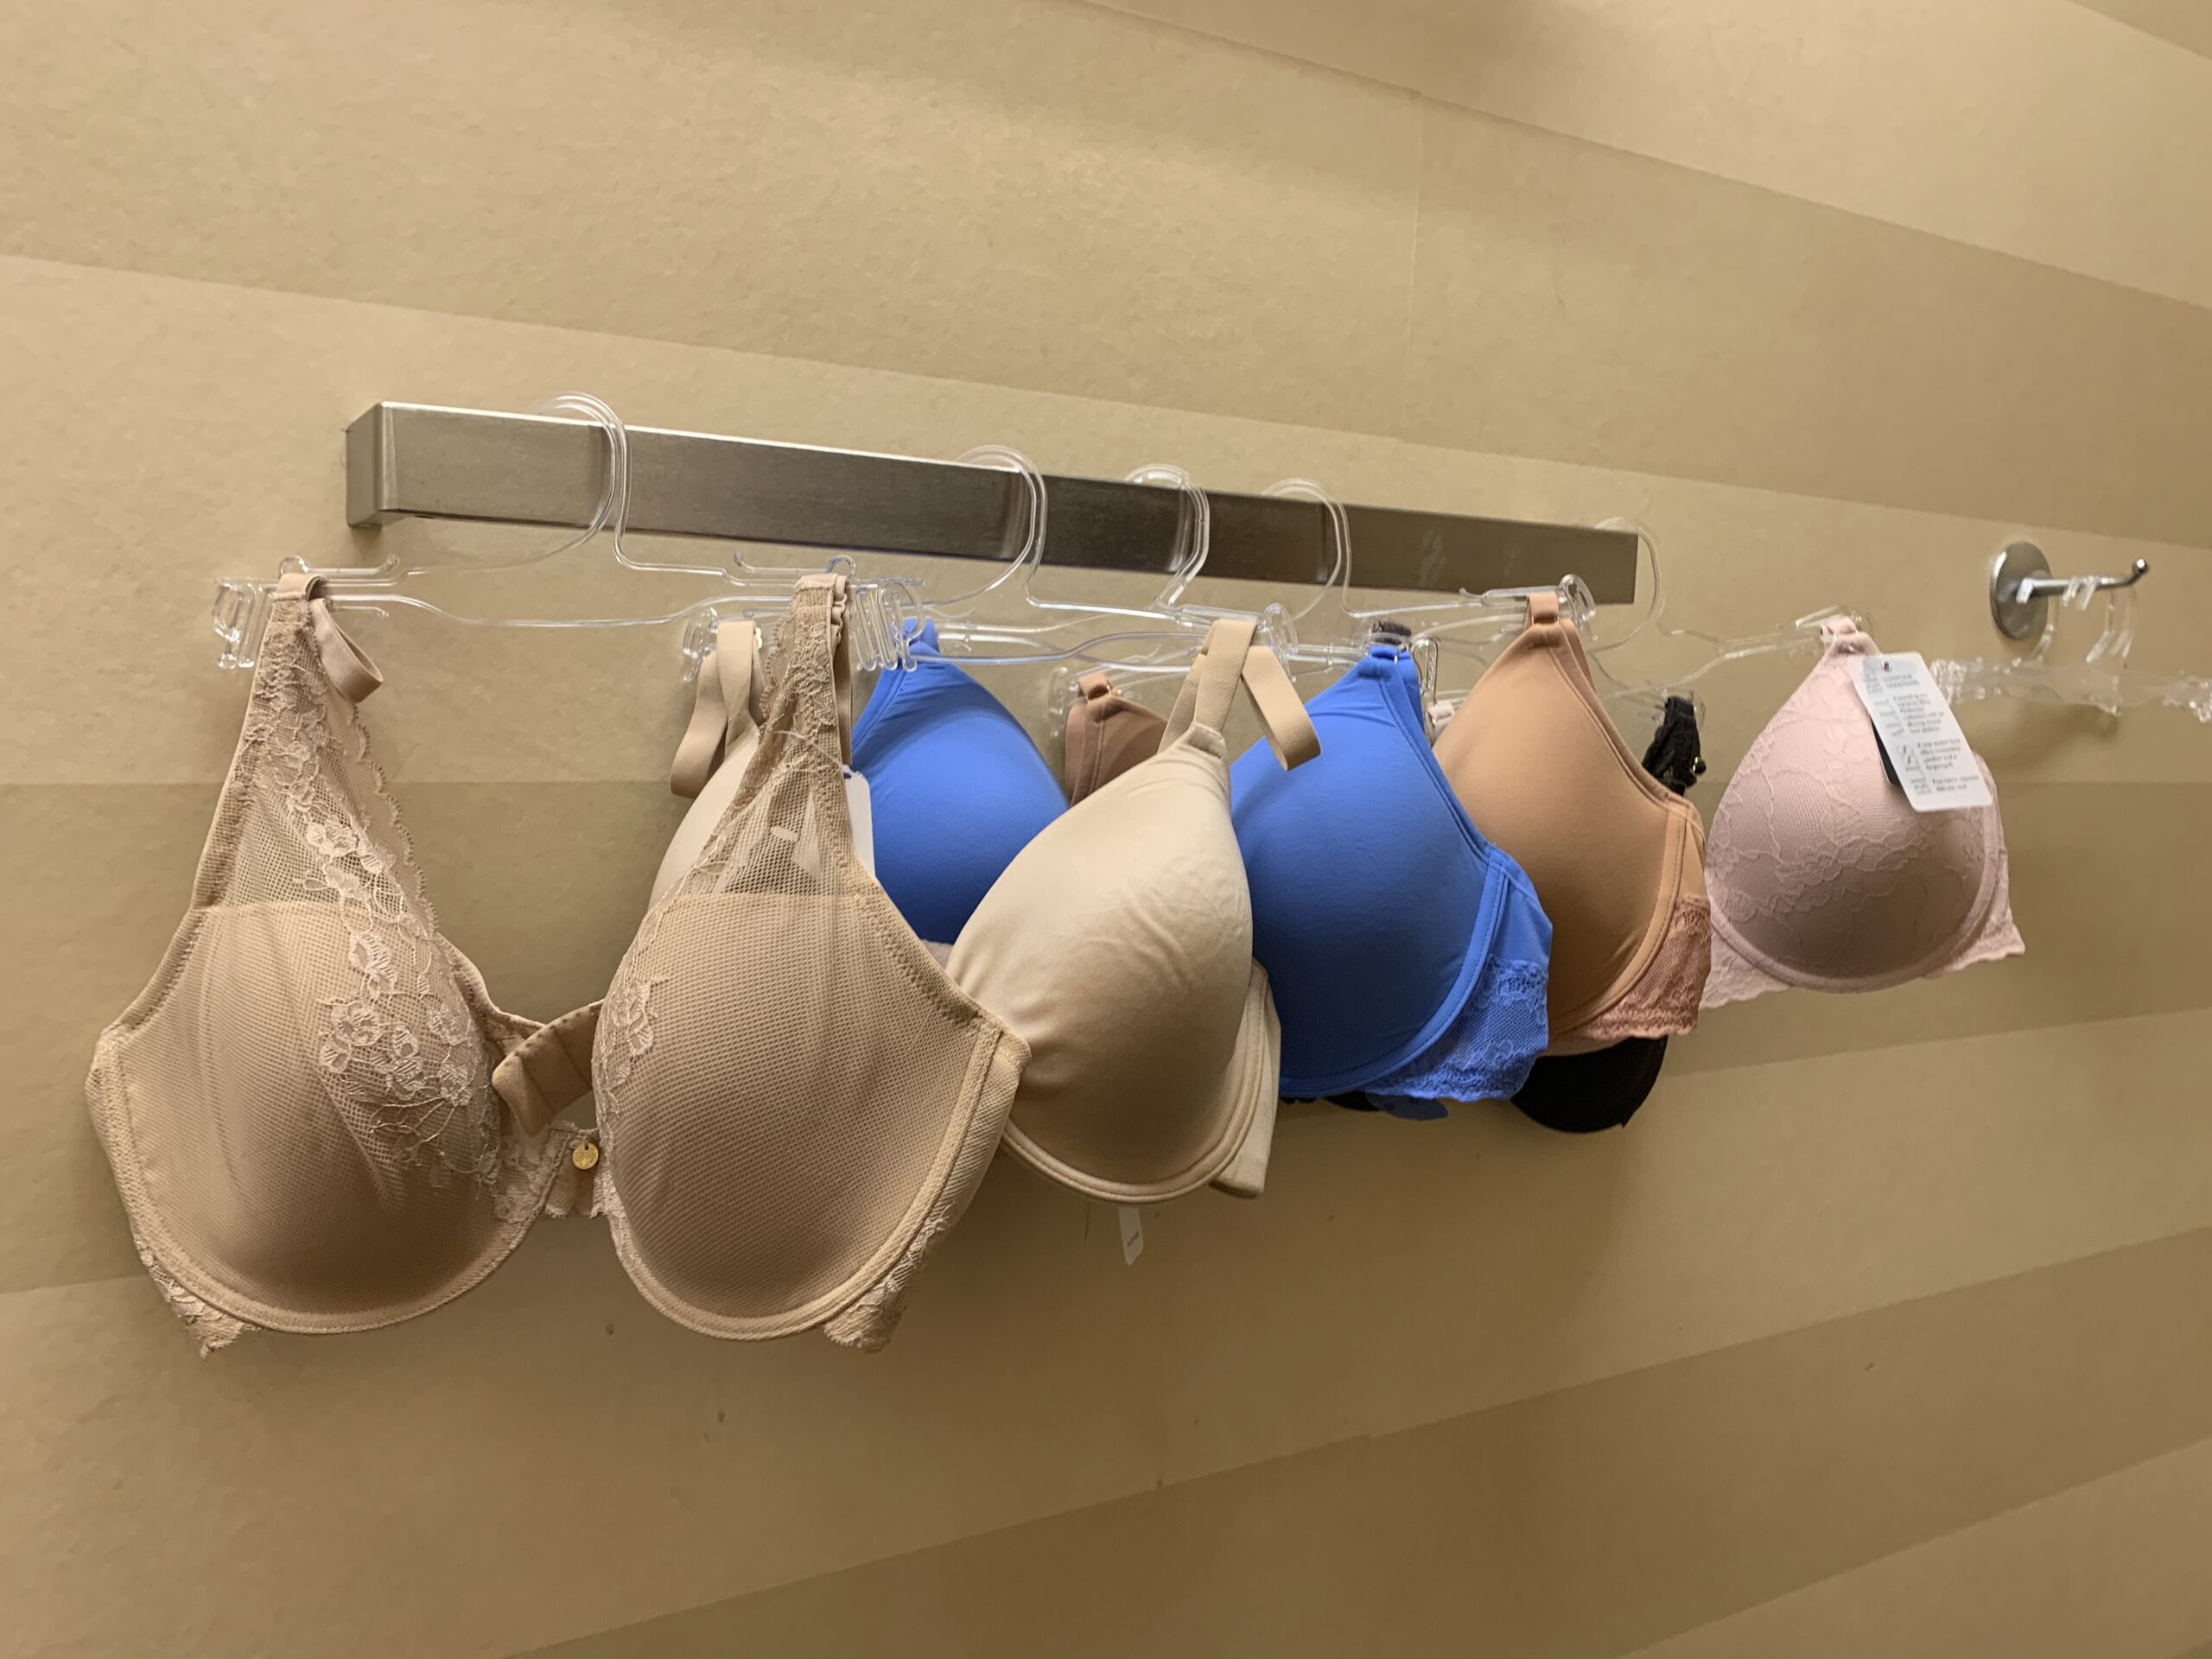 Upstate woman finds her fit in bra business